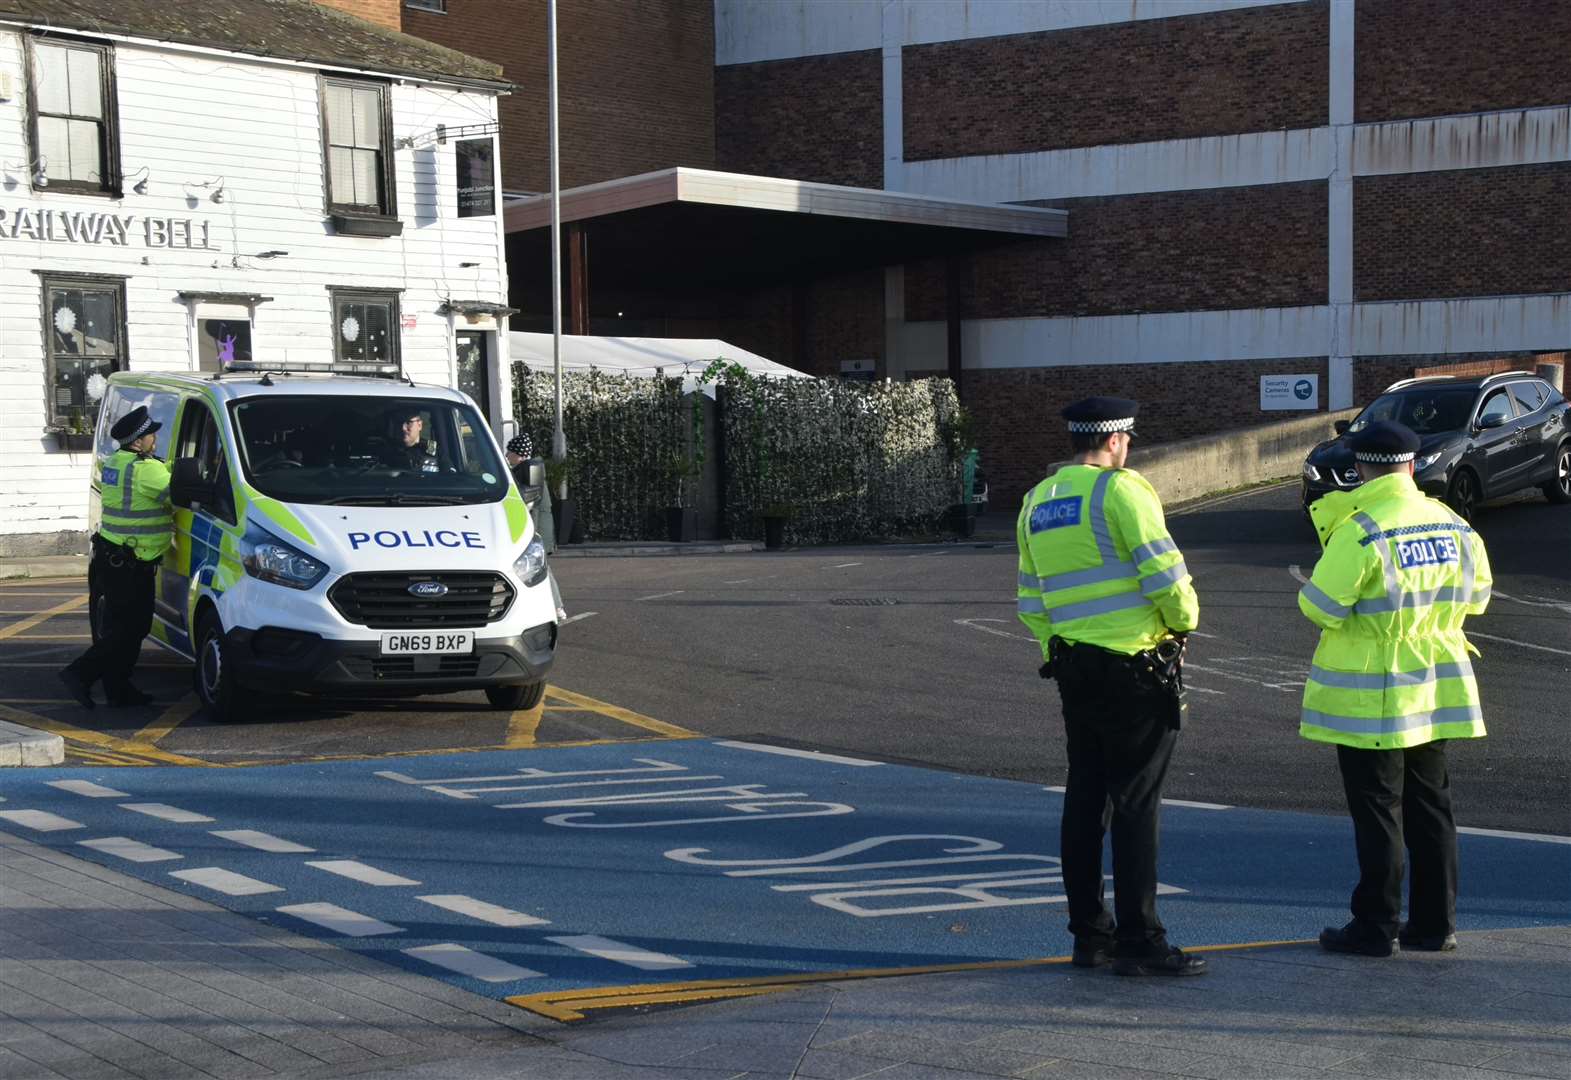 Police were cracking down on drivers trying to cut through the bus gate. Picture: Fraser Gray